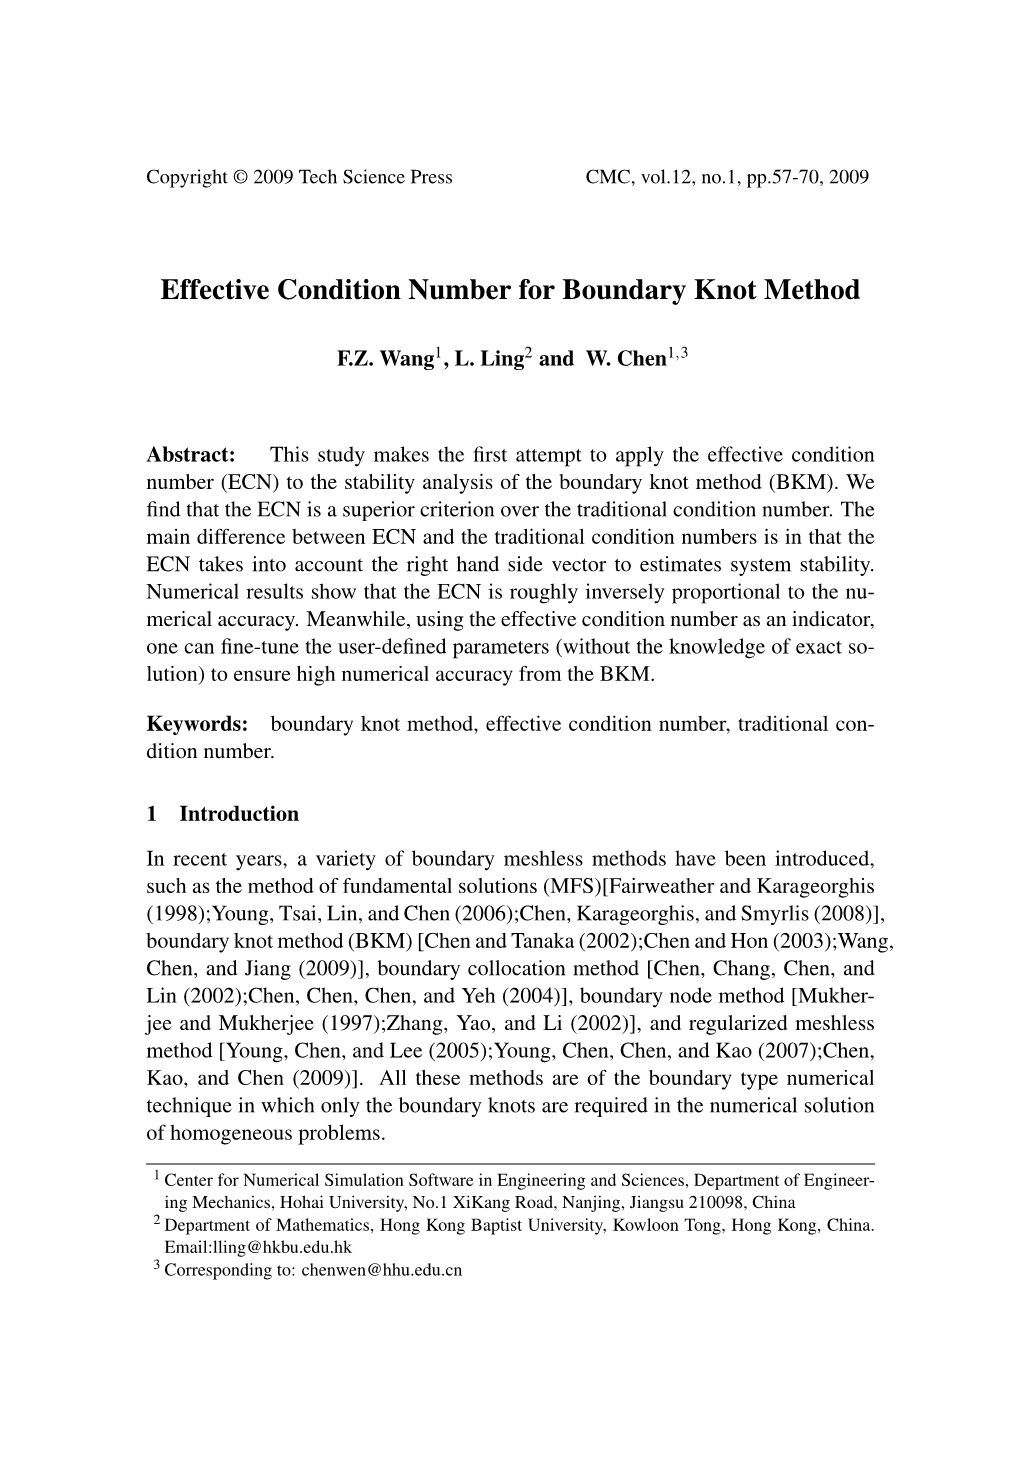 Effective Condition Number for Boundary Knot Method